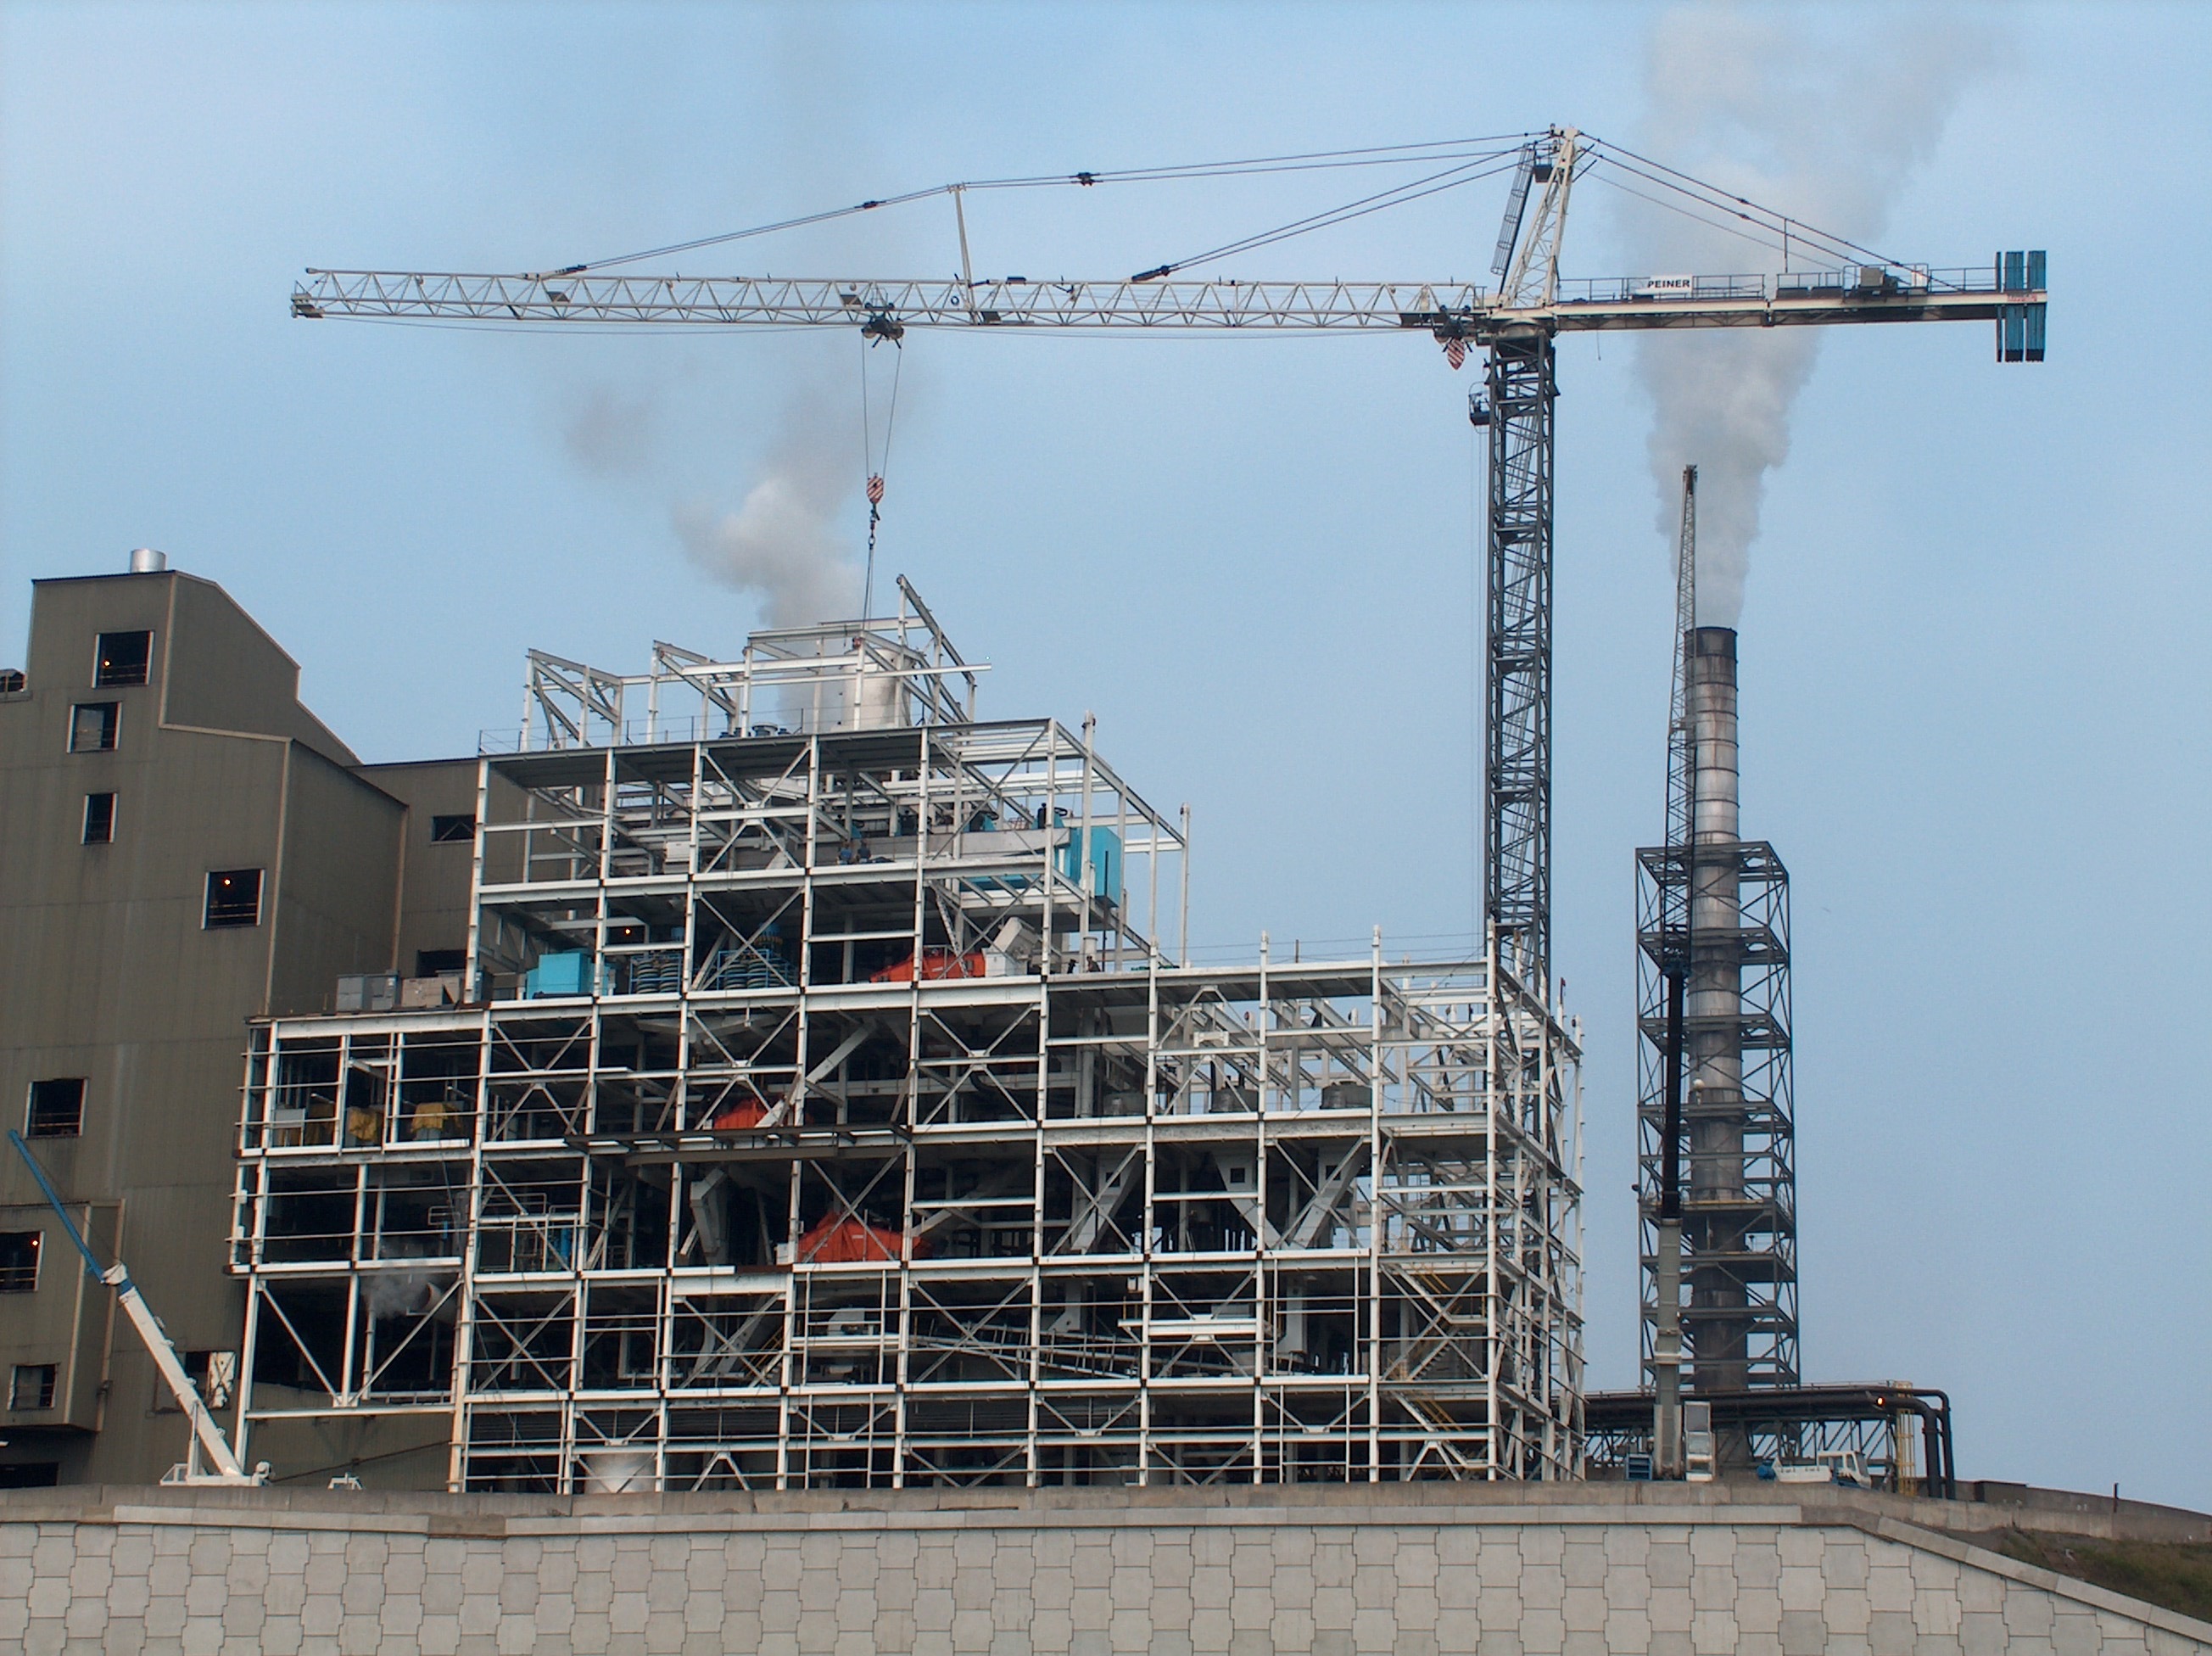 Steel Fabrication at A Coal Processing Plant